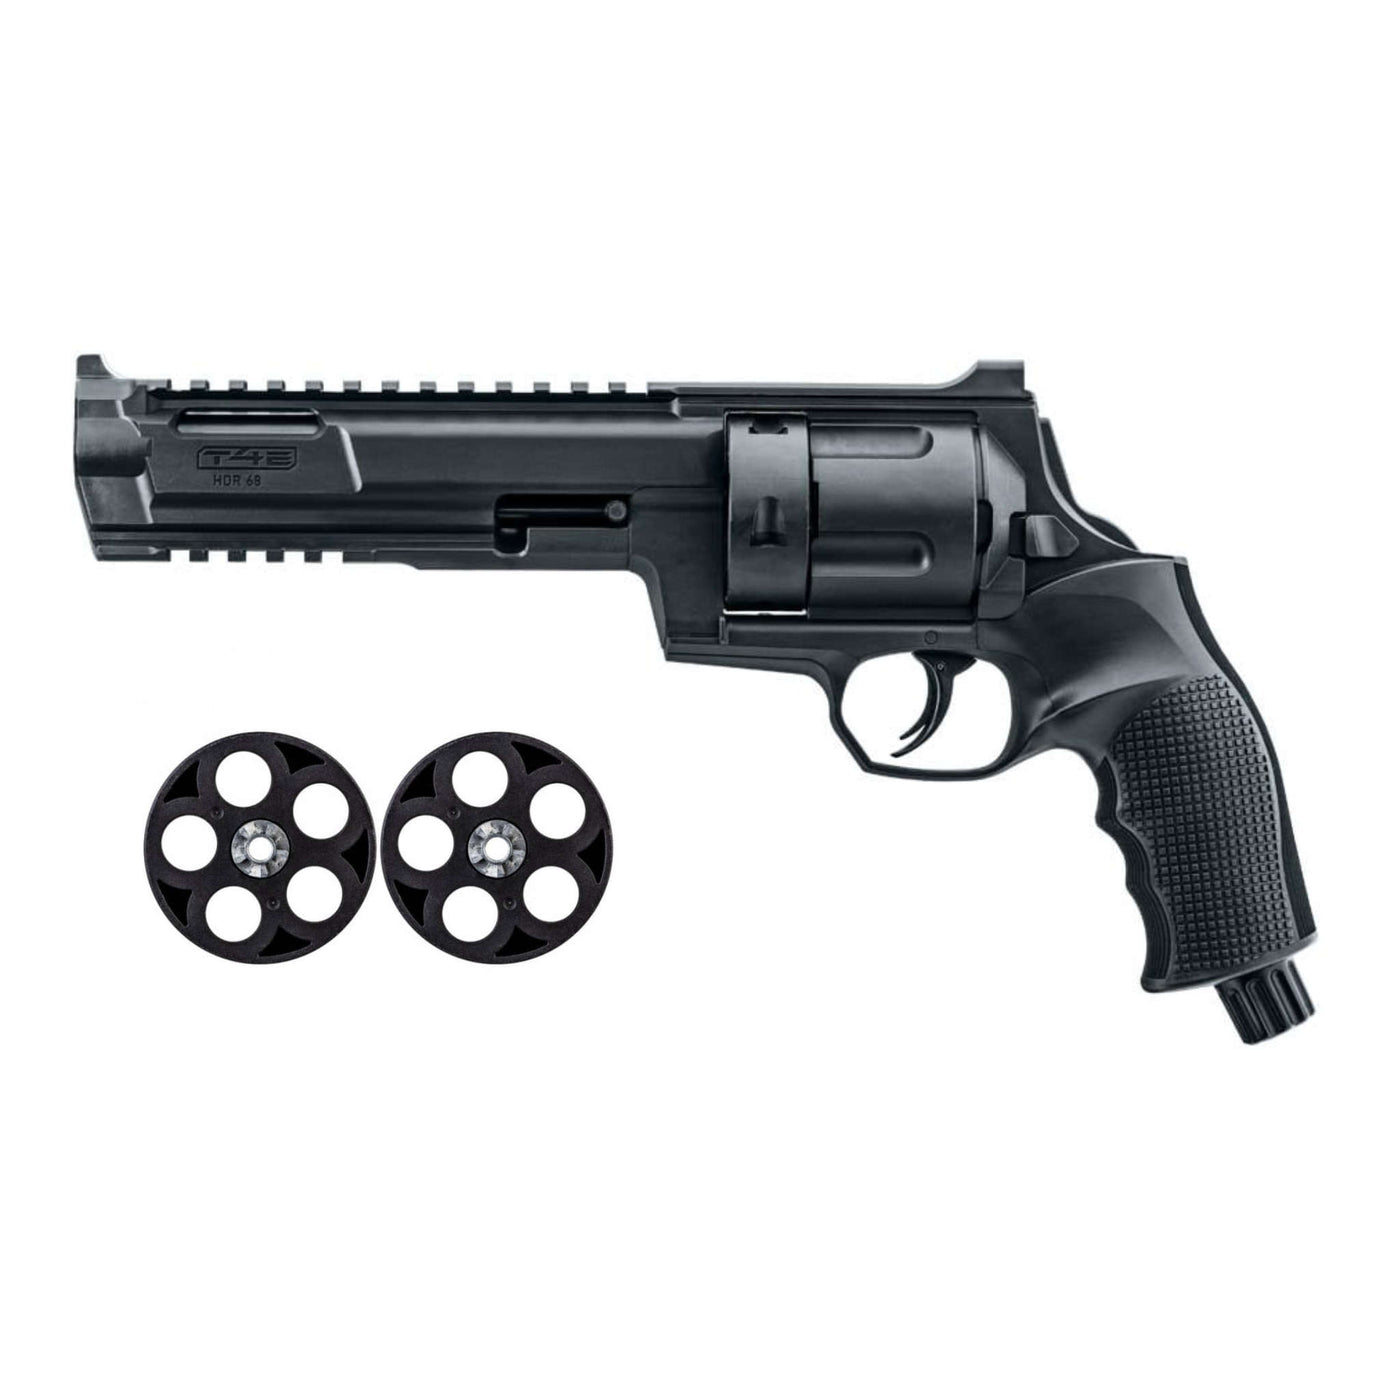 The T4E HDR 68 paintball marker is an easy to use .68 caliber revolver made with tough, durable polymer and aircraft grade aluminium. Umarexs HDR 68 is powered by one 12g CO2 cartridge and is easy and economical to use.